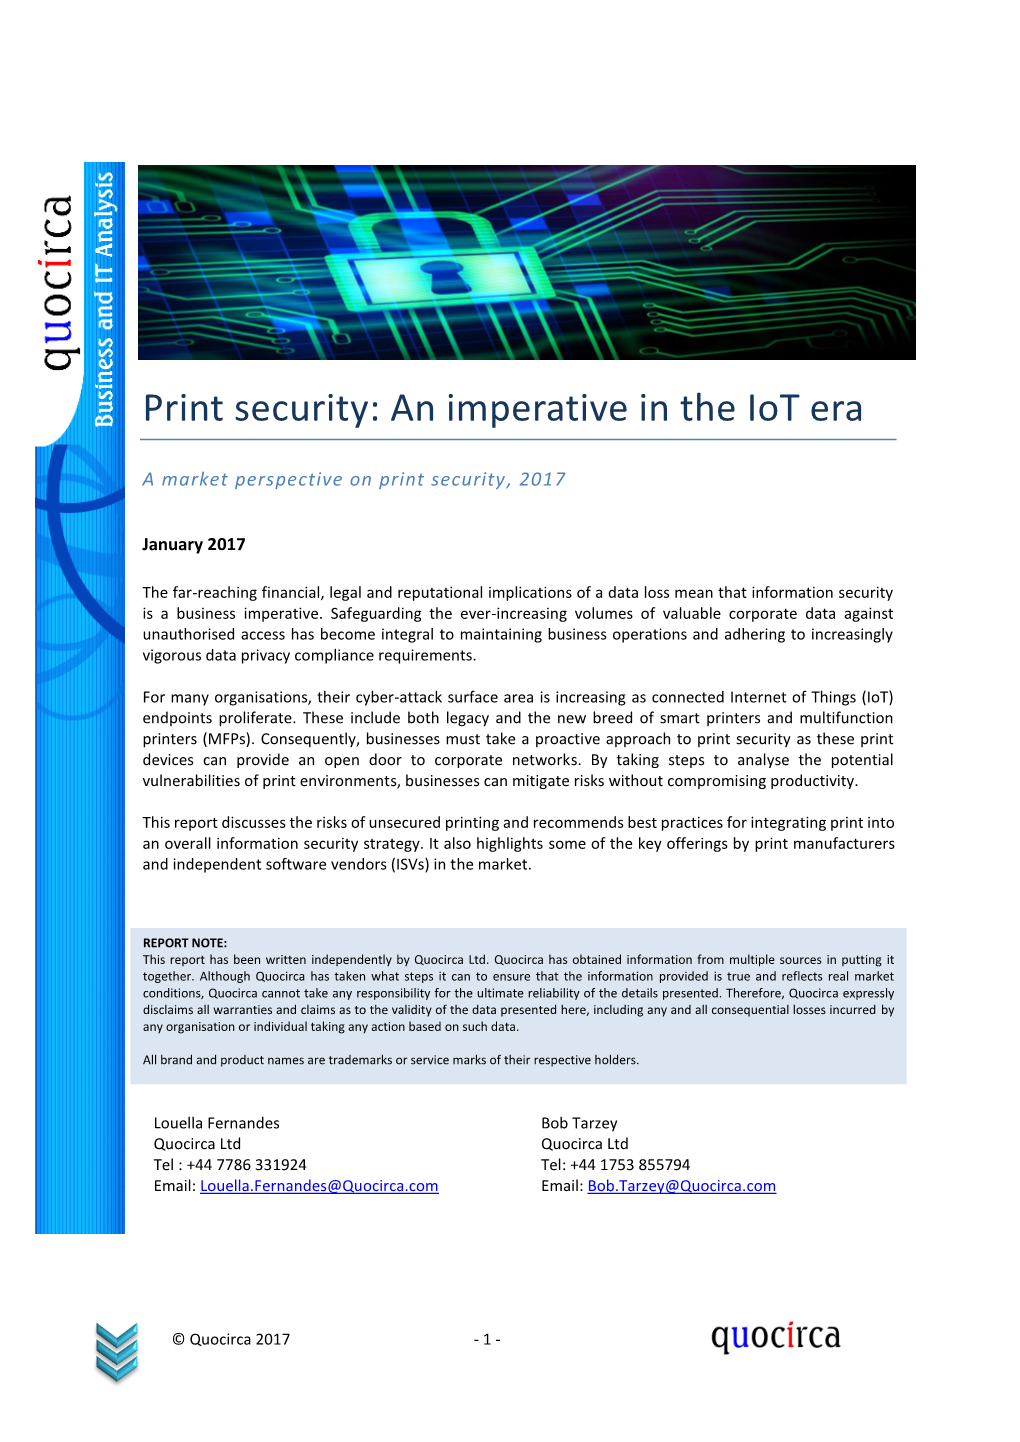 Print Security: an Imperative in the Iot Era